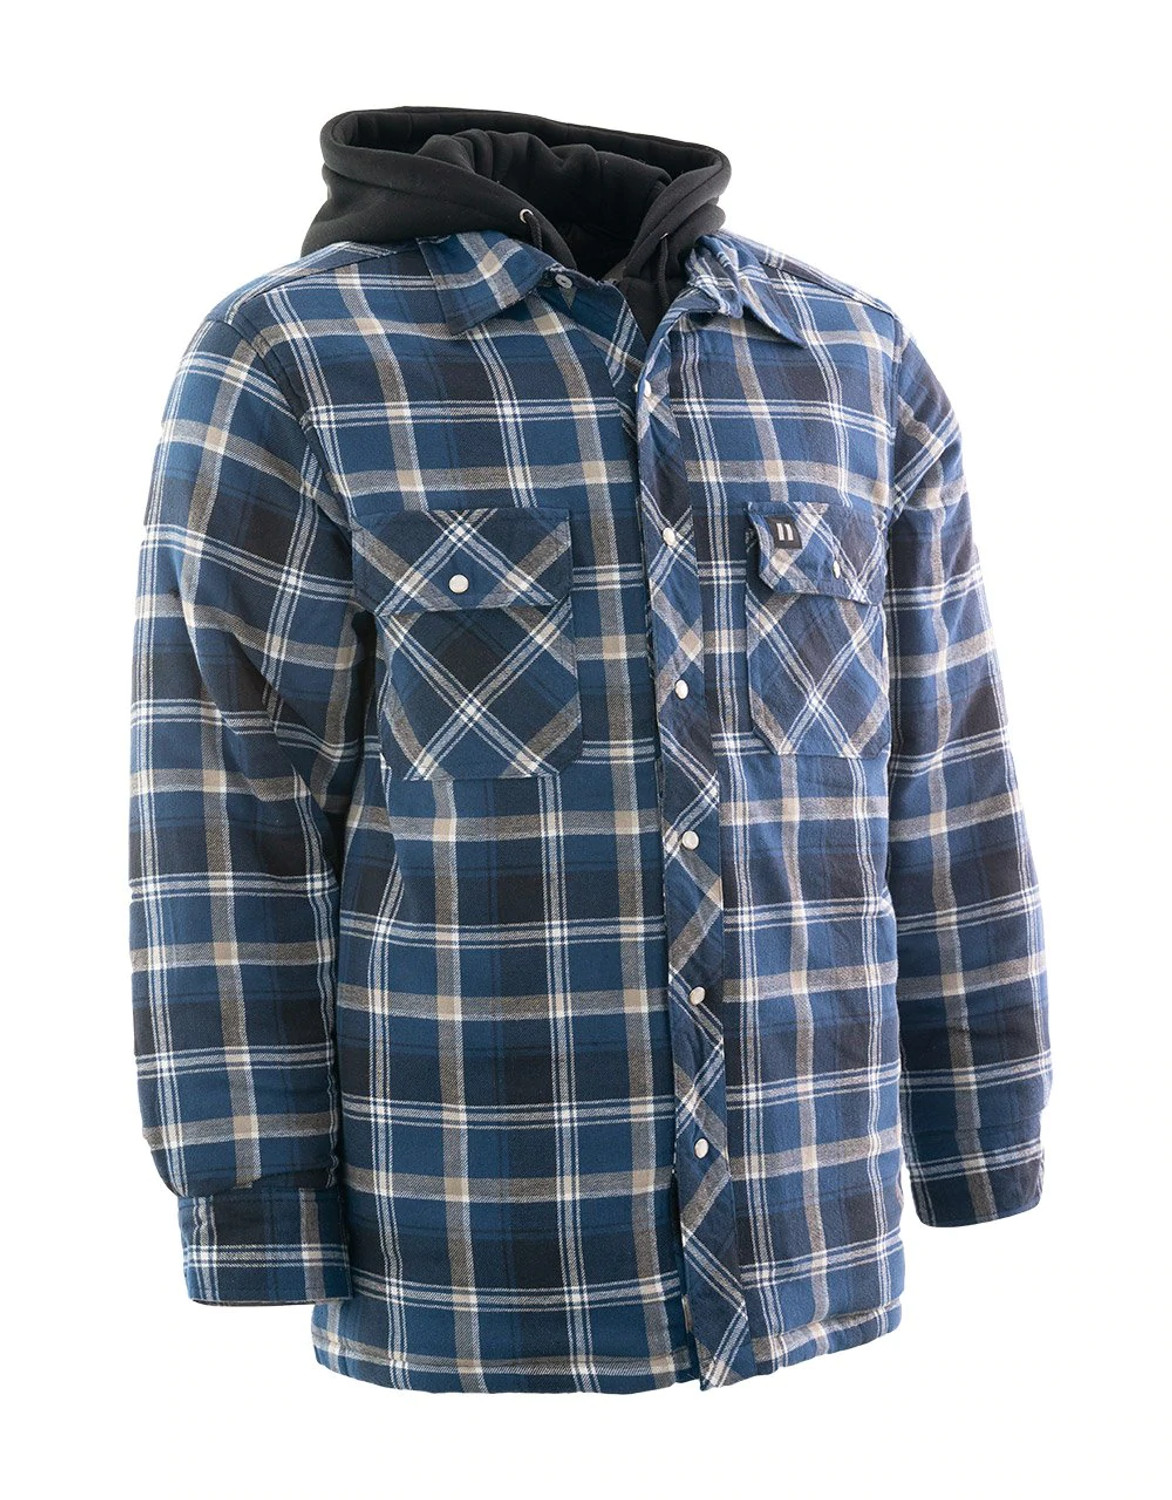 Forcefield Blue Plaid Hooded Quilted Flannel Shirt Jacket